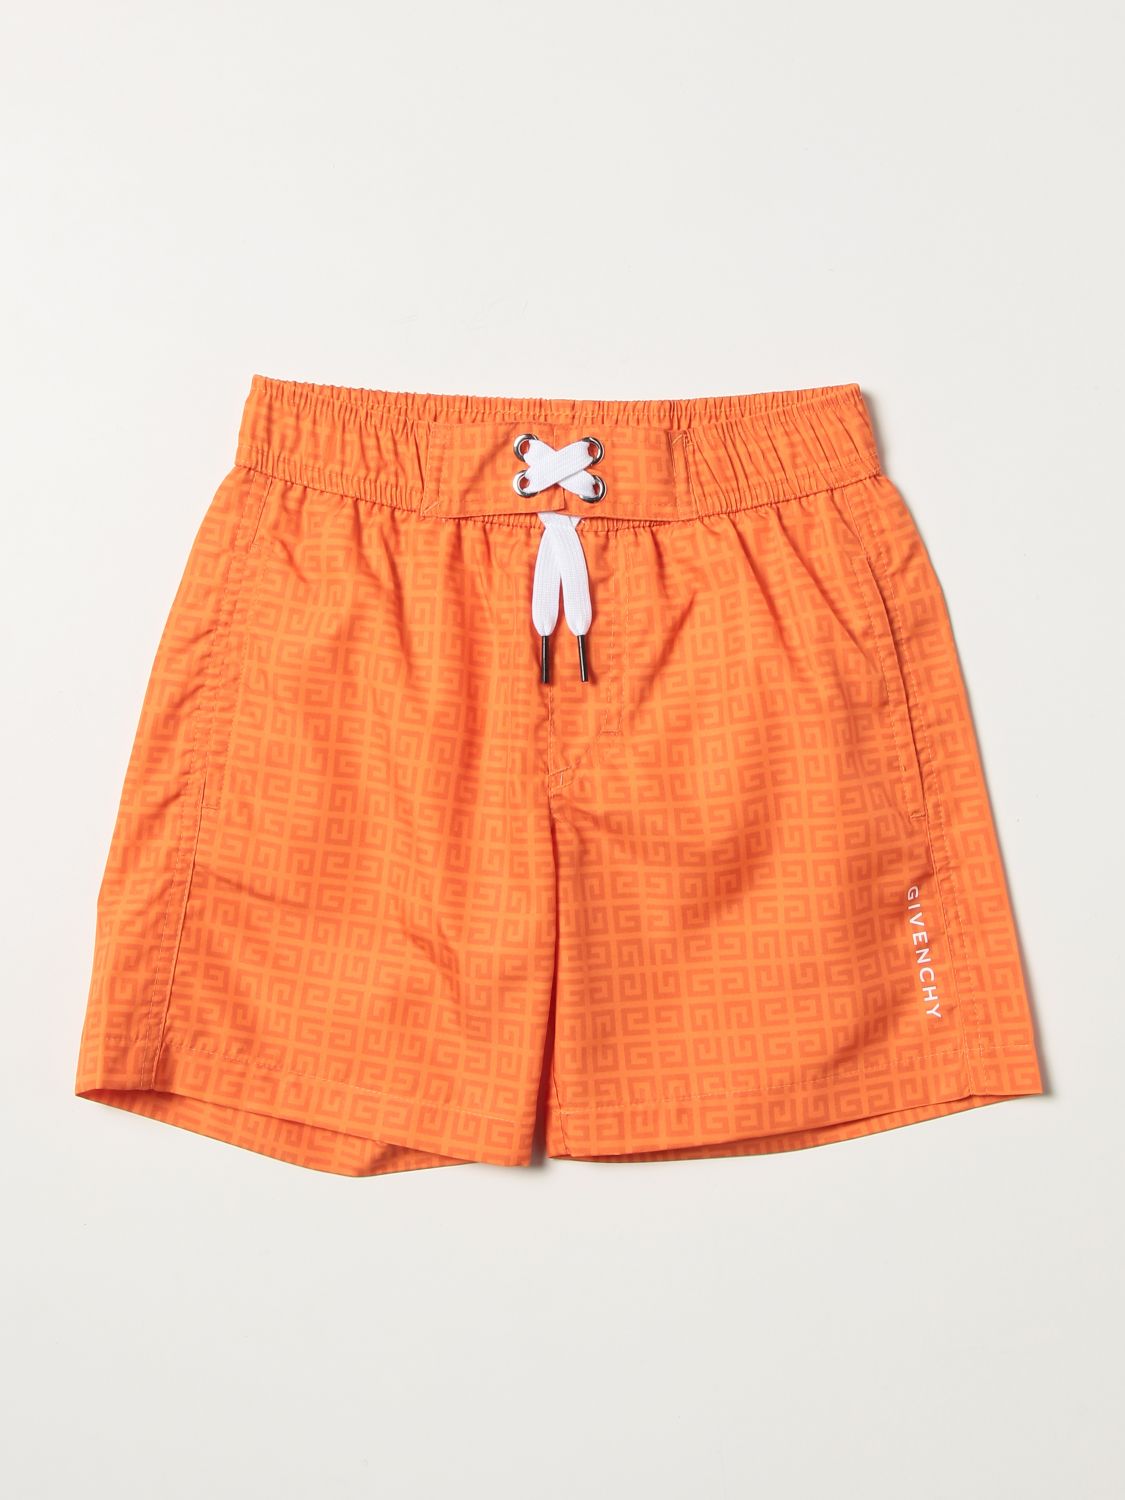 Swimsuit Givenchy: Givenchy swim trunks with logo allover orange 1